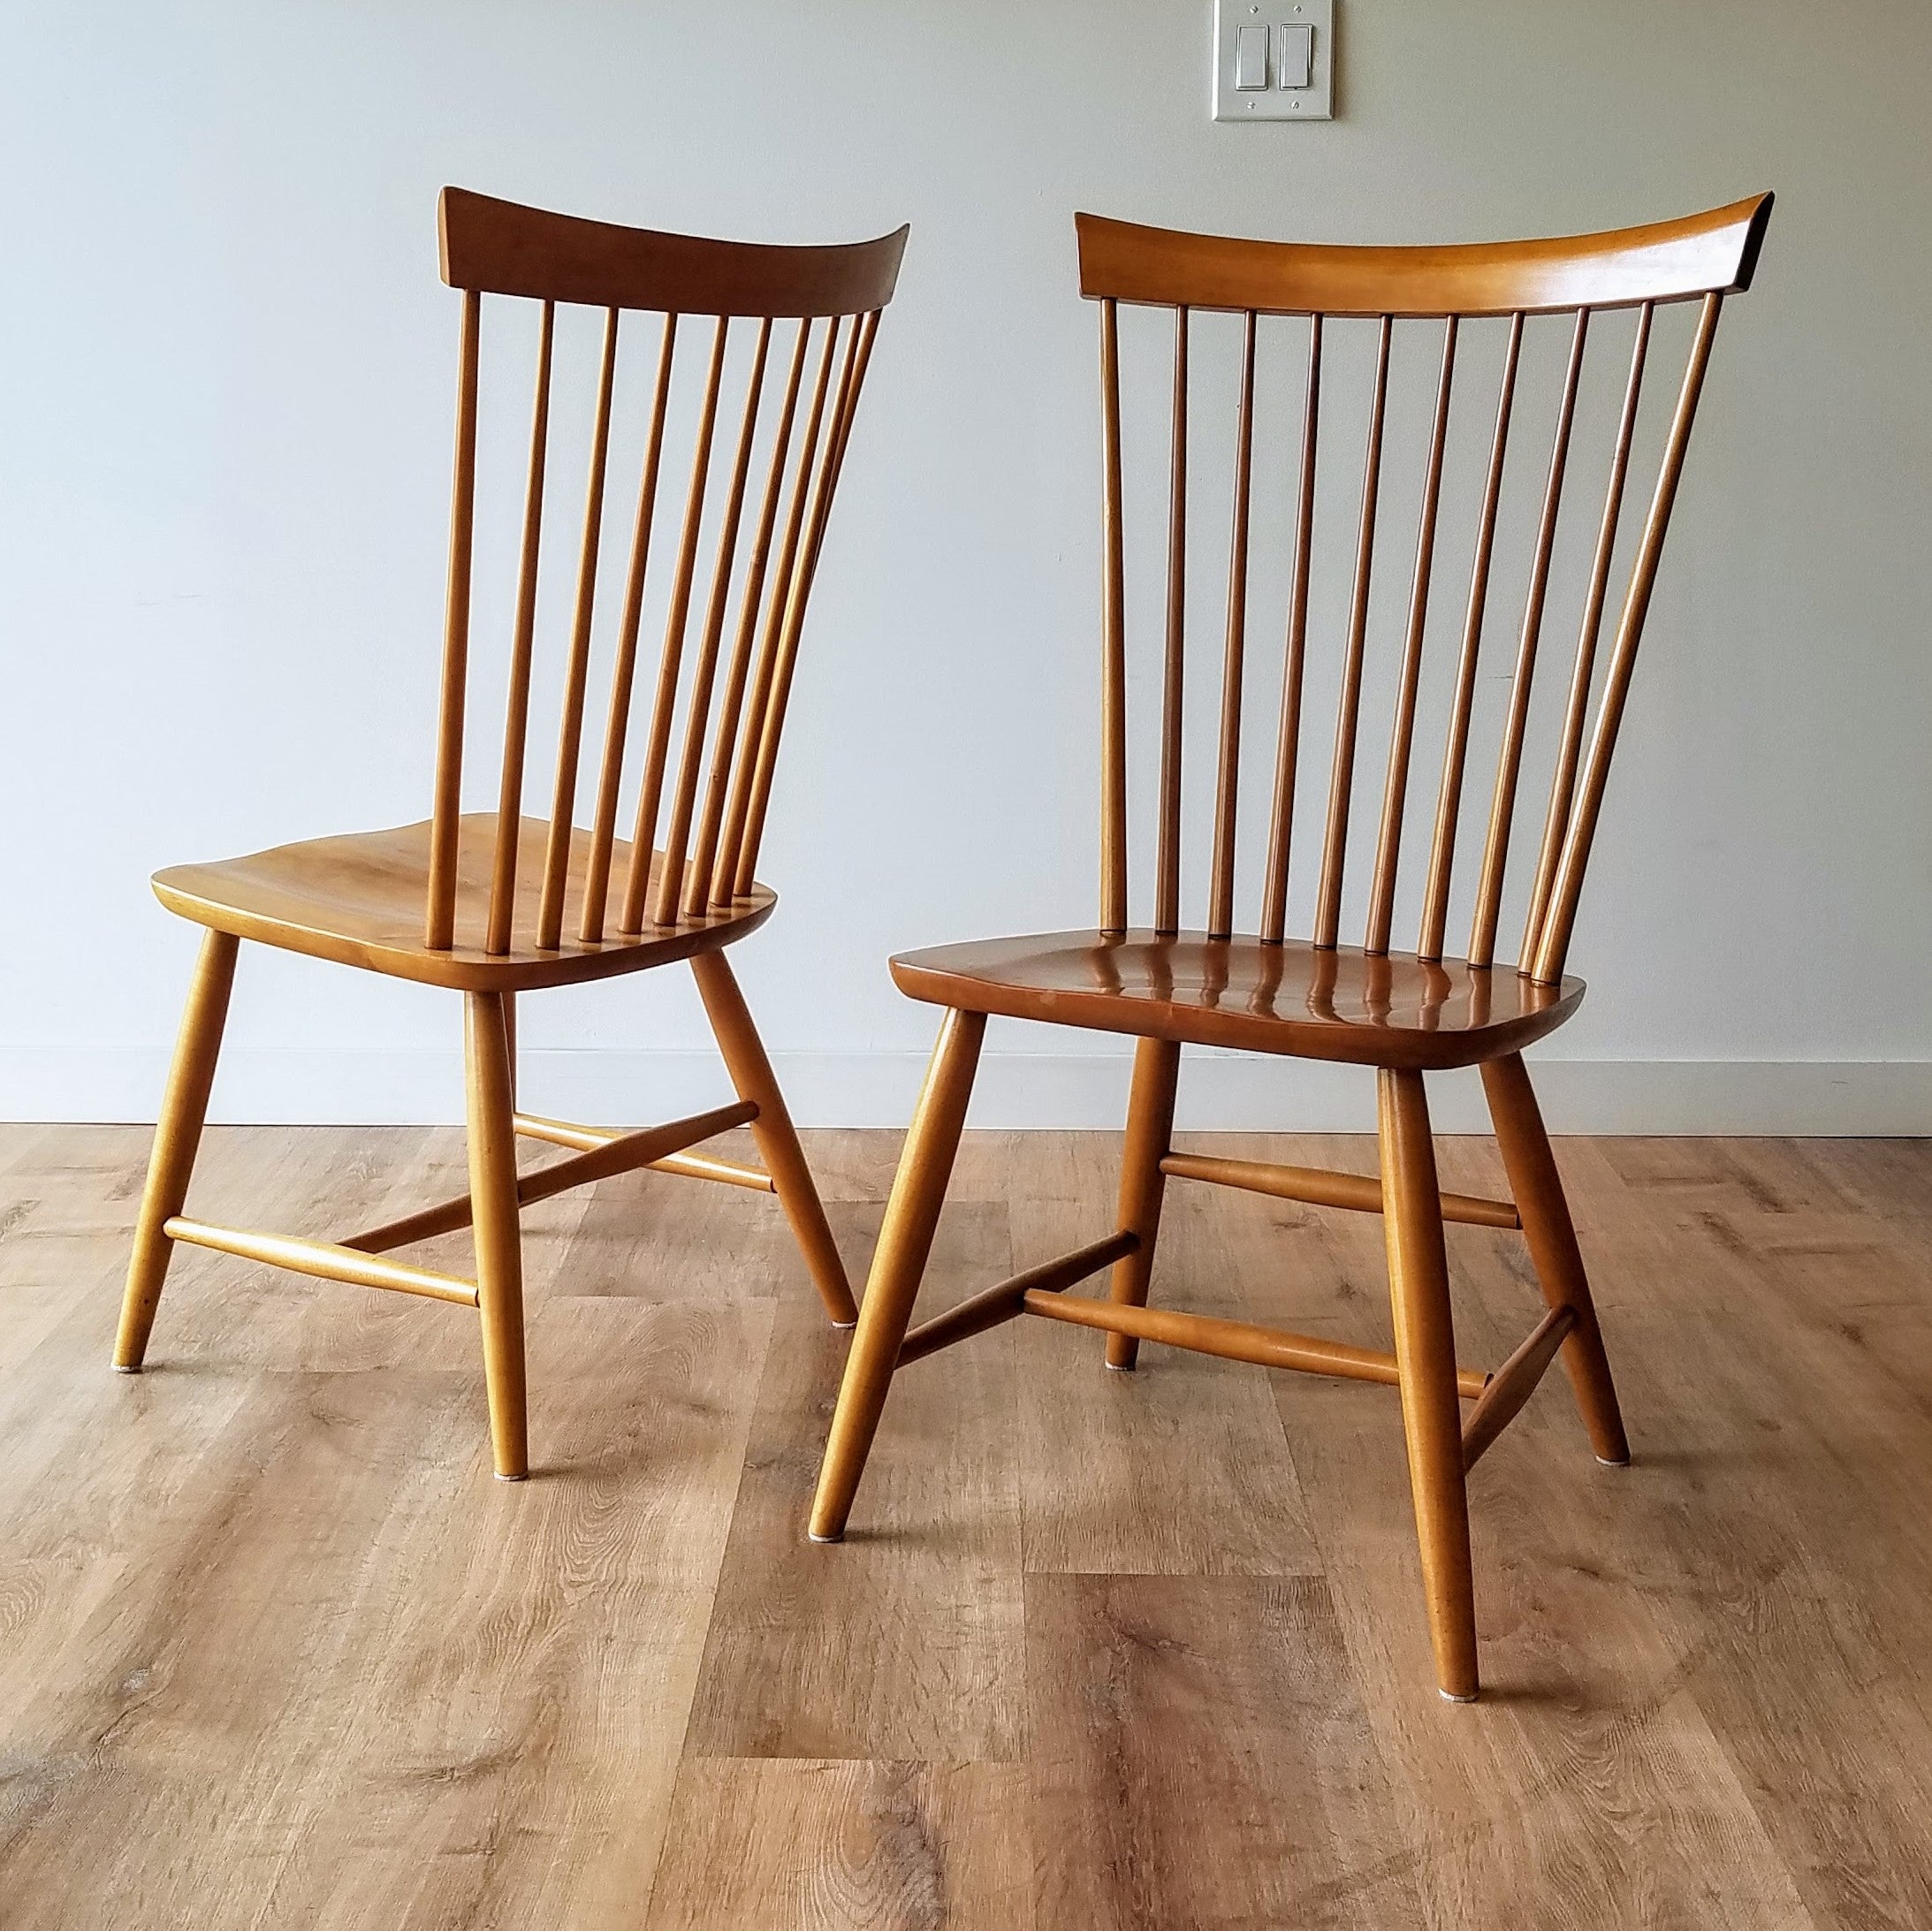 Ethan Allen Maple Dining Chairs